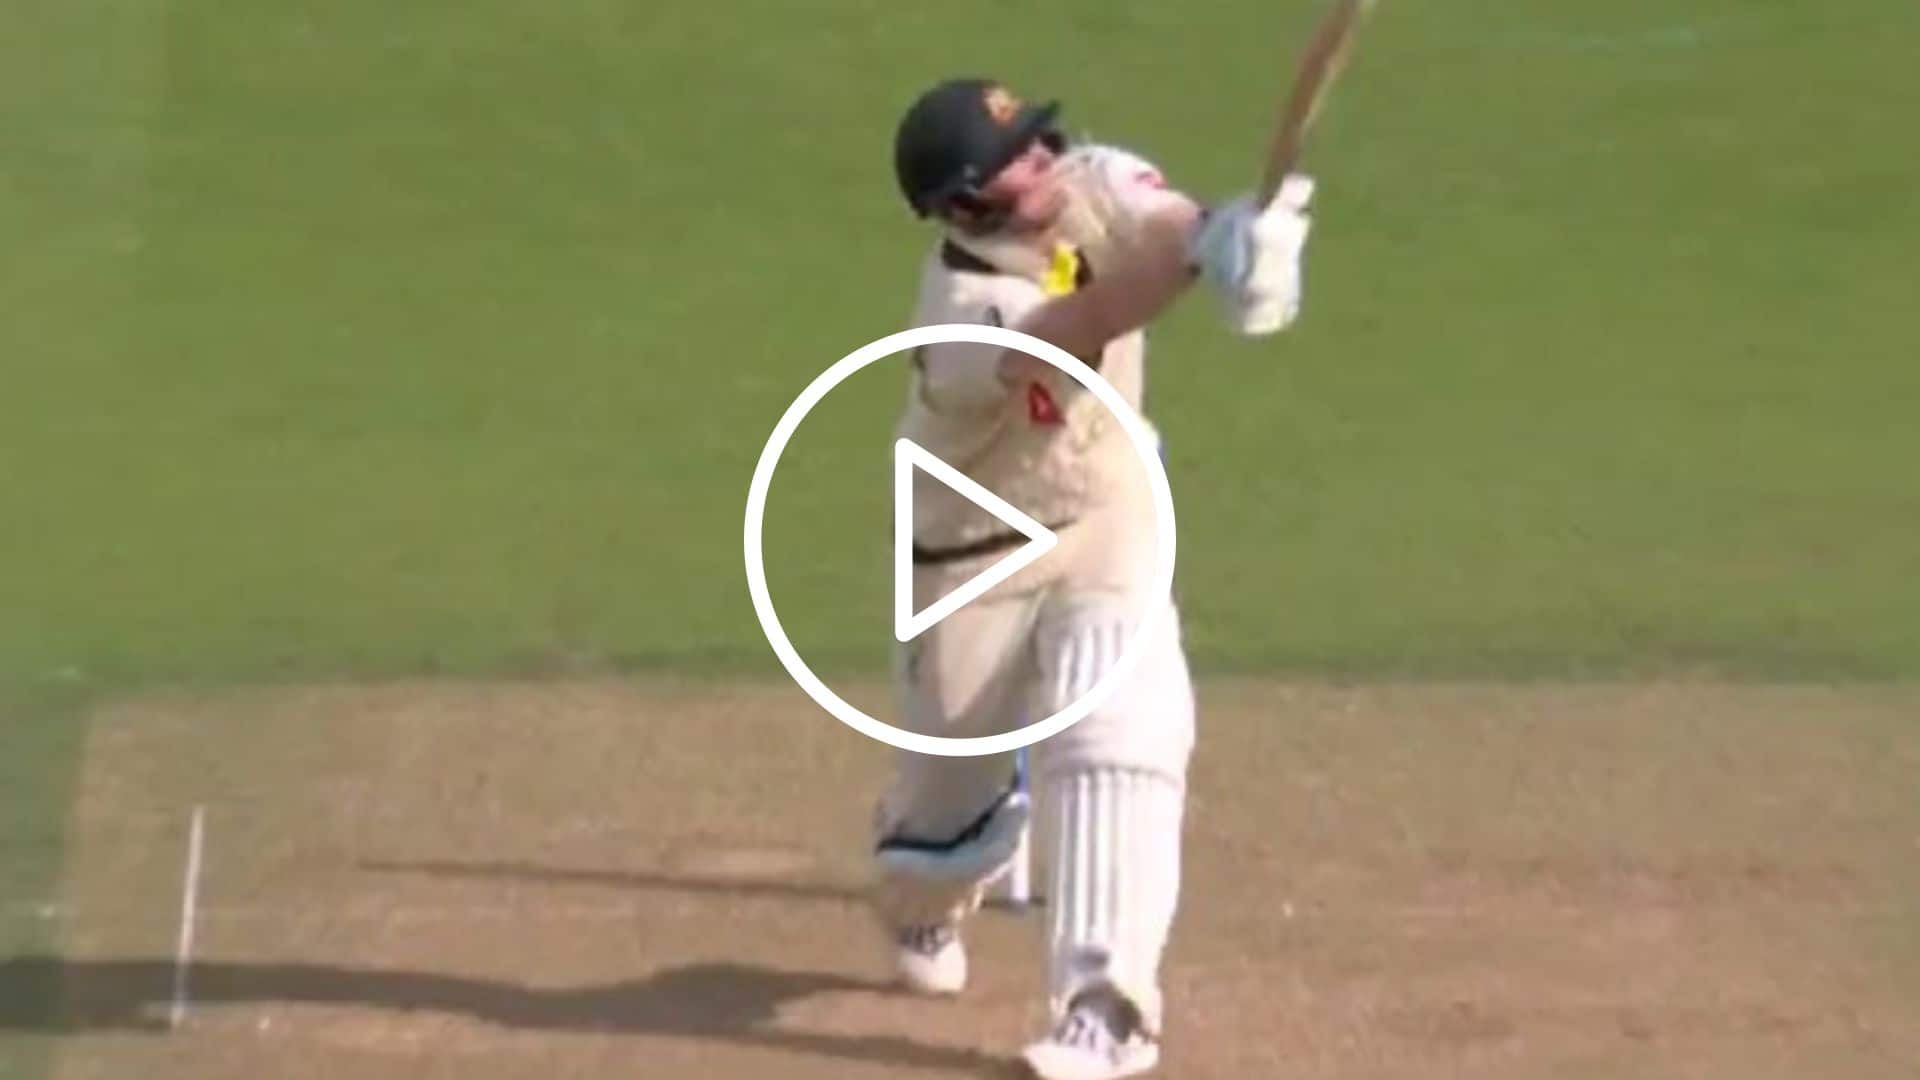 [Watch] Bairstow Takes A Fantastic Running Catch To Send Smith Back To The Hut